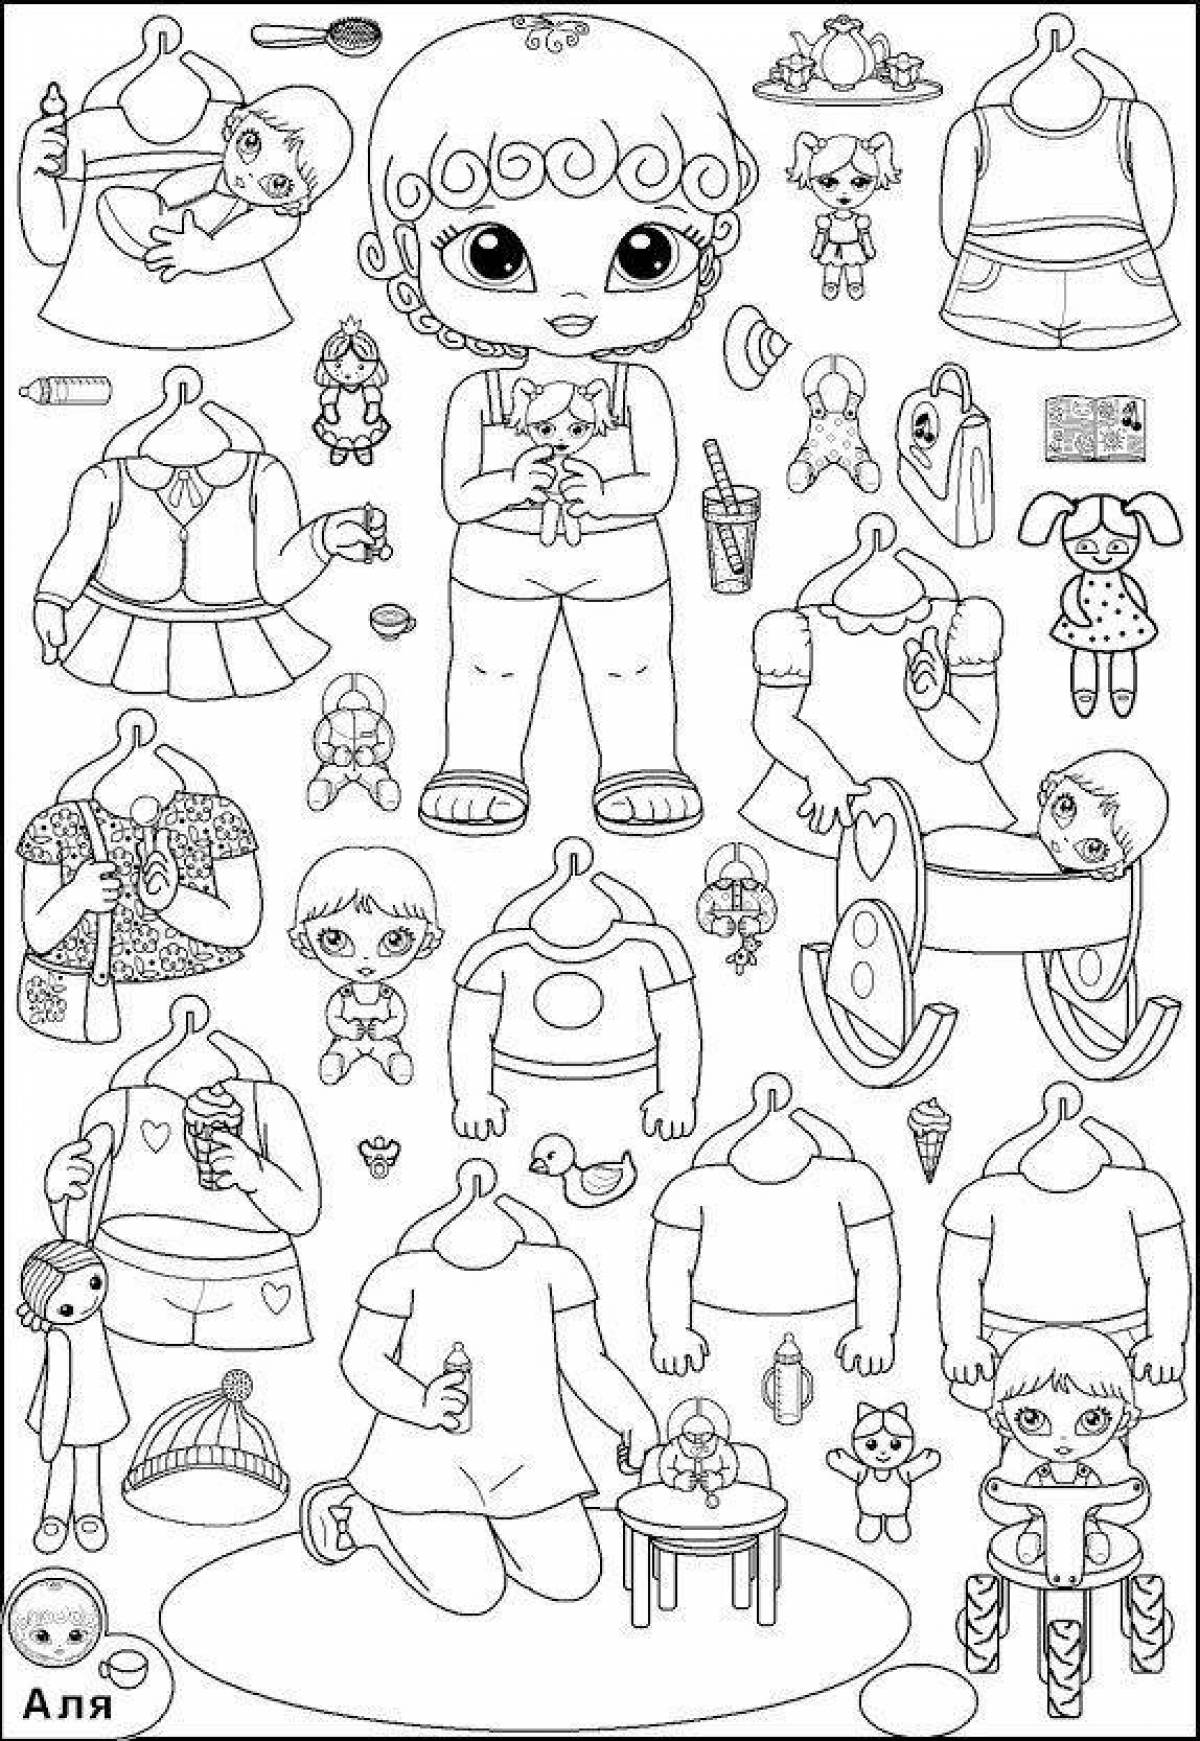 Adorable lol doll coloring book with cut out clothes